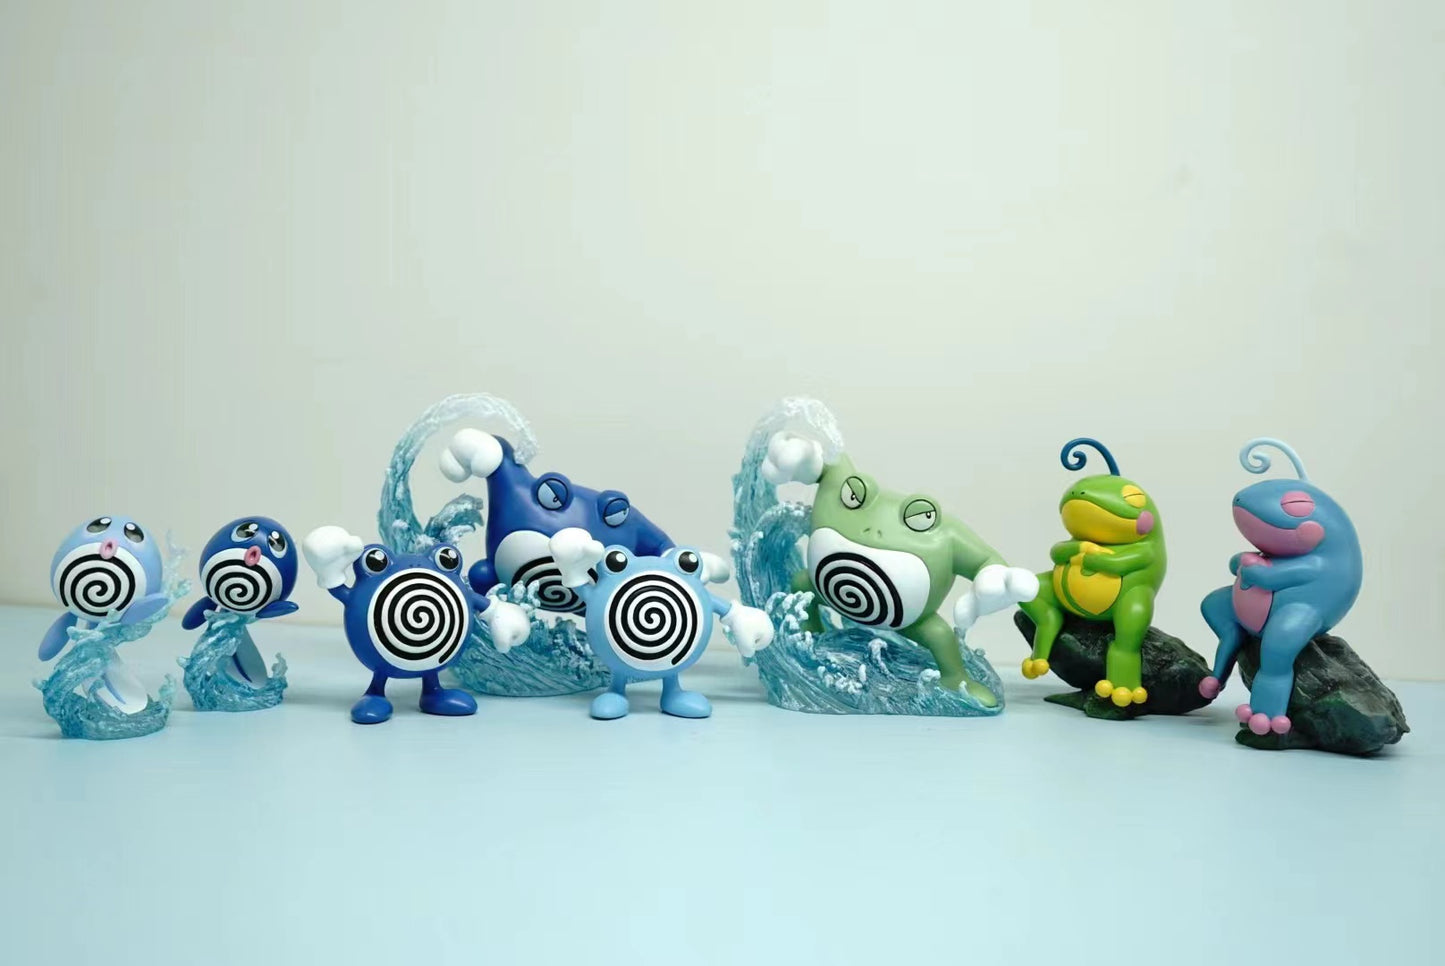 〖Make Up The Balance〗Pokemon Scale World Poliwag Poliwhirl Poliwrath Politoed #060 #061 #062 #186 1:20 - Pallet Town Studio